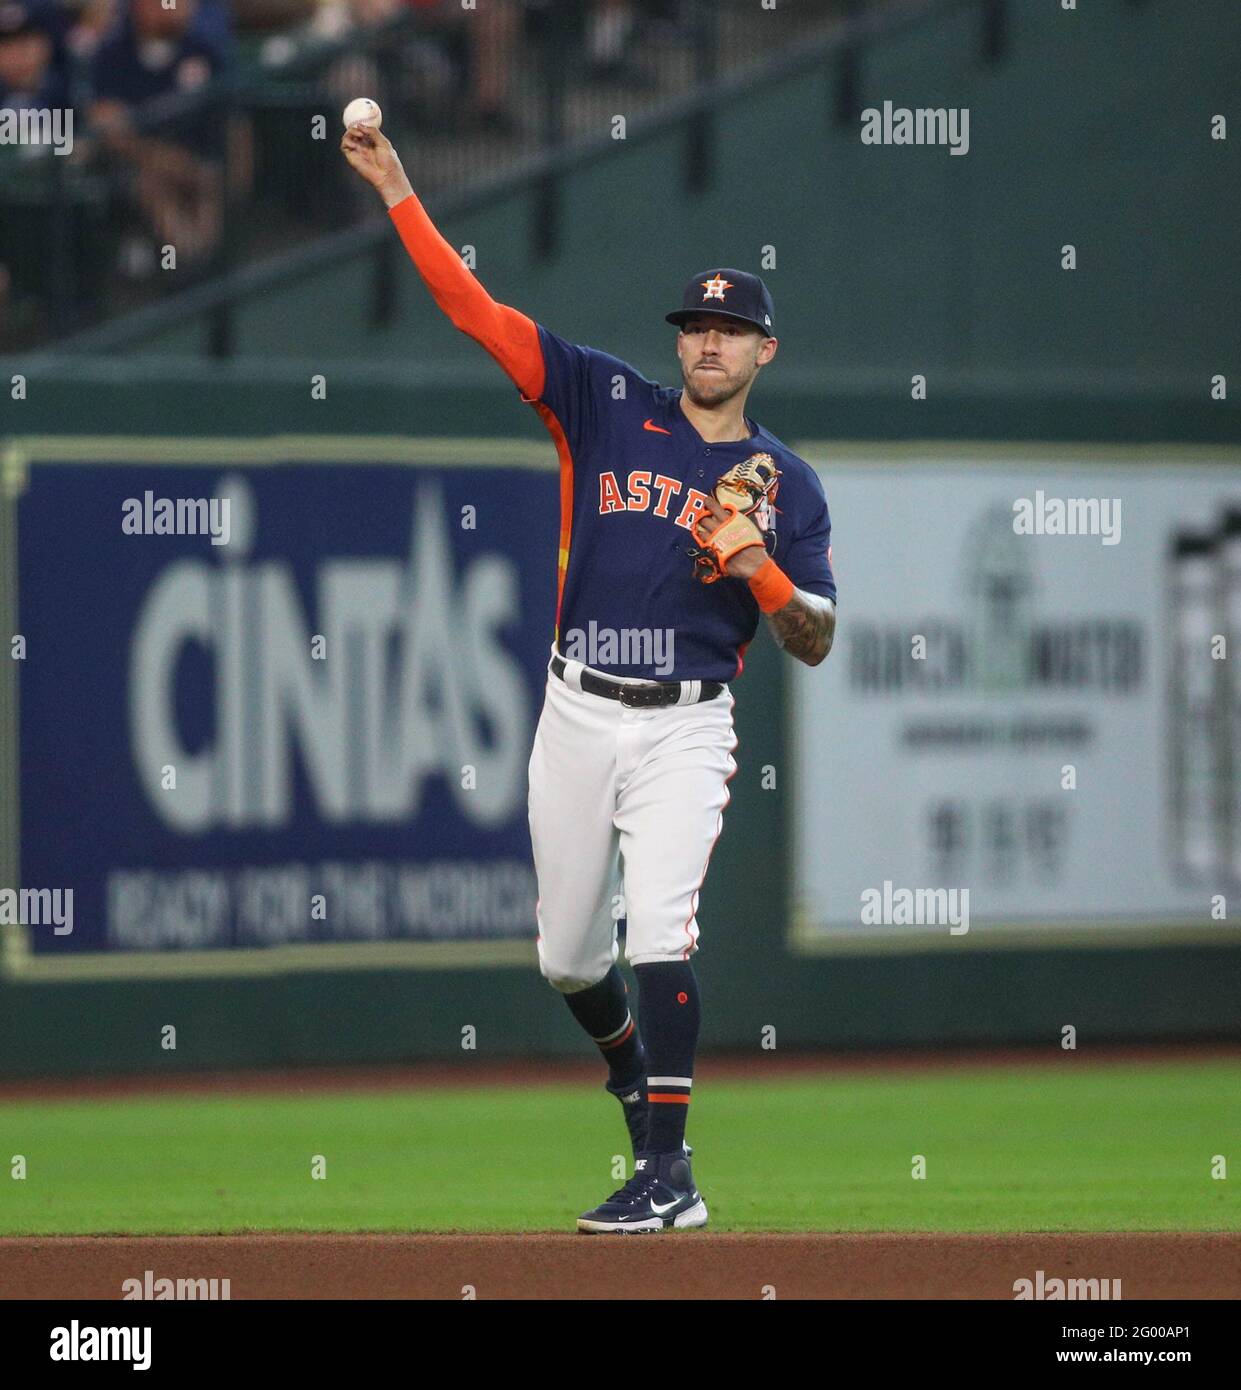 May 30, 2021: Carlos Correa (1) makes a throw to first base for